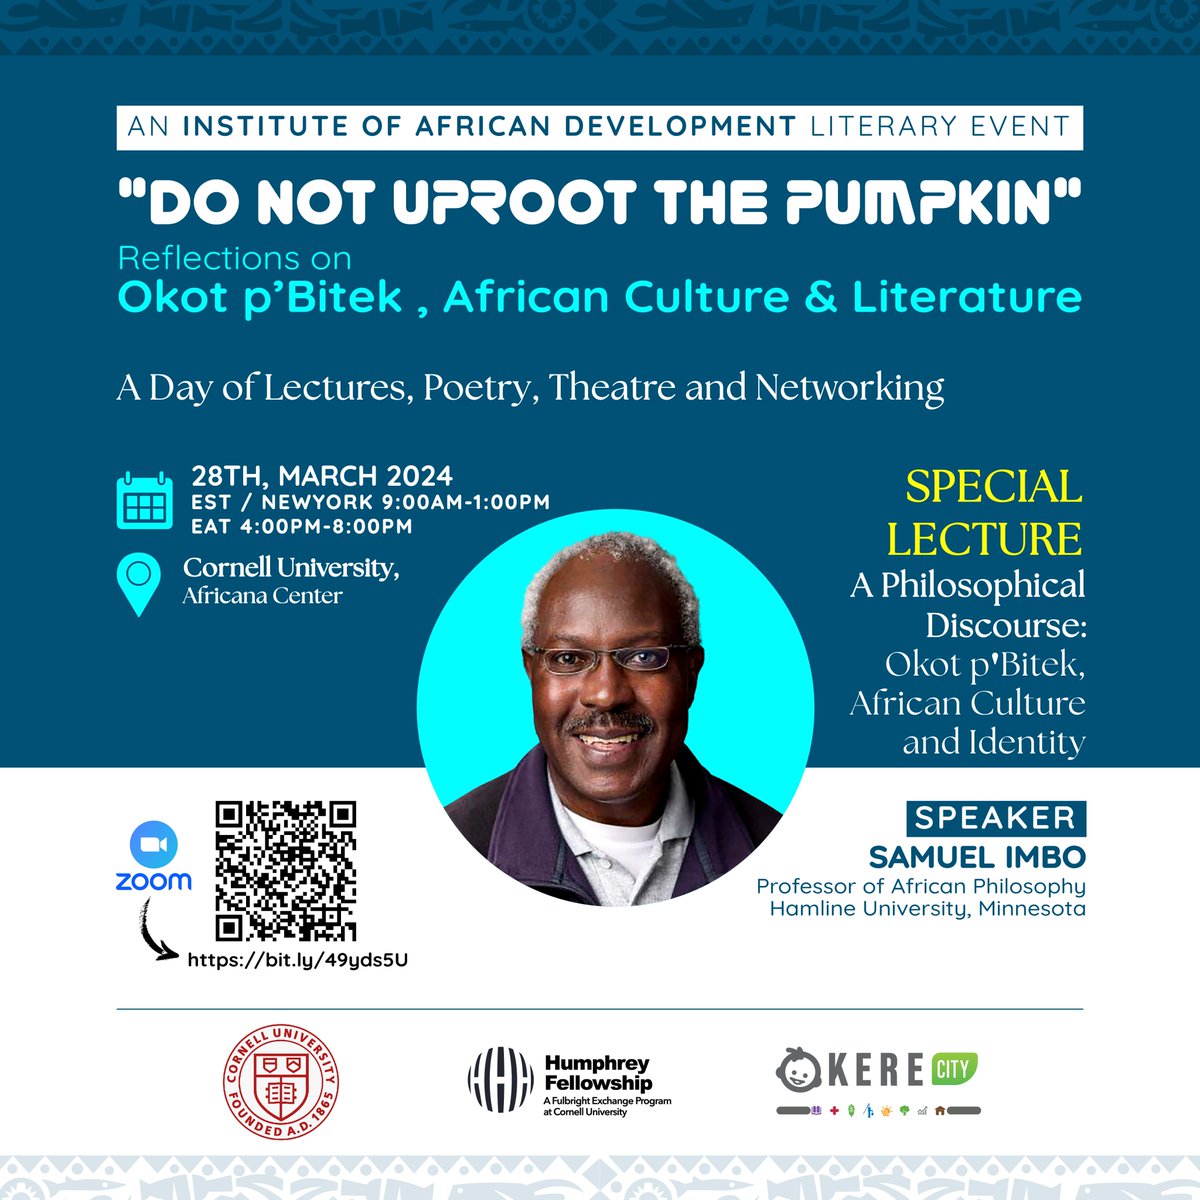 Prof. Sam Imbo will discuss insights from his book, 'Oral Traditions as Philosophy: Okot p'Bitek's Legacy for African Philosophy' at the #pBitekSeminar I am curating at @Cornell, an event convened by @IADCornellUniv & @okerecity. Event page > bit.ly/49TyFaE